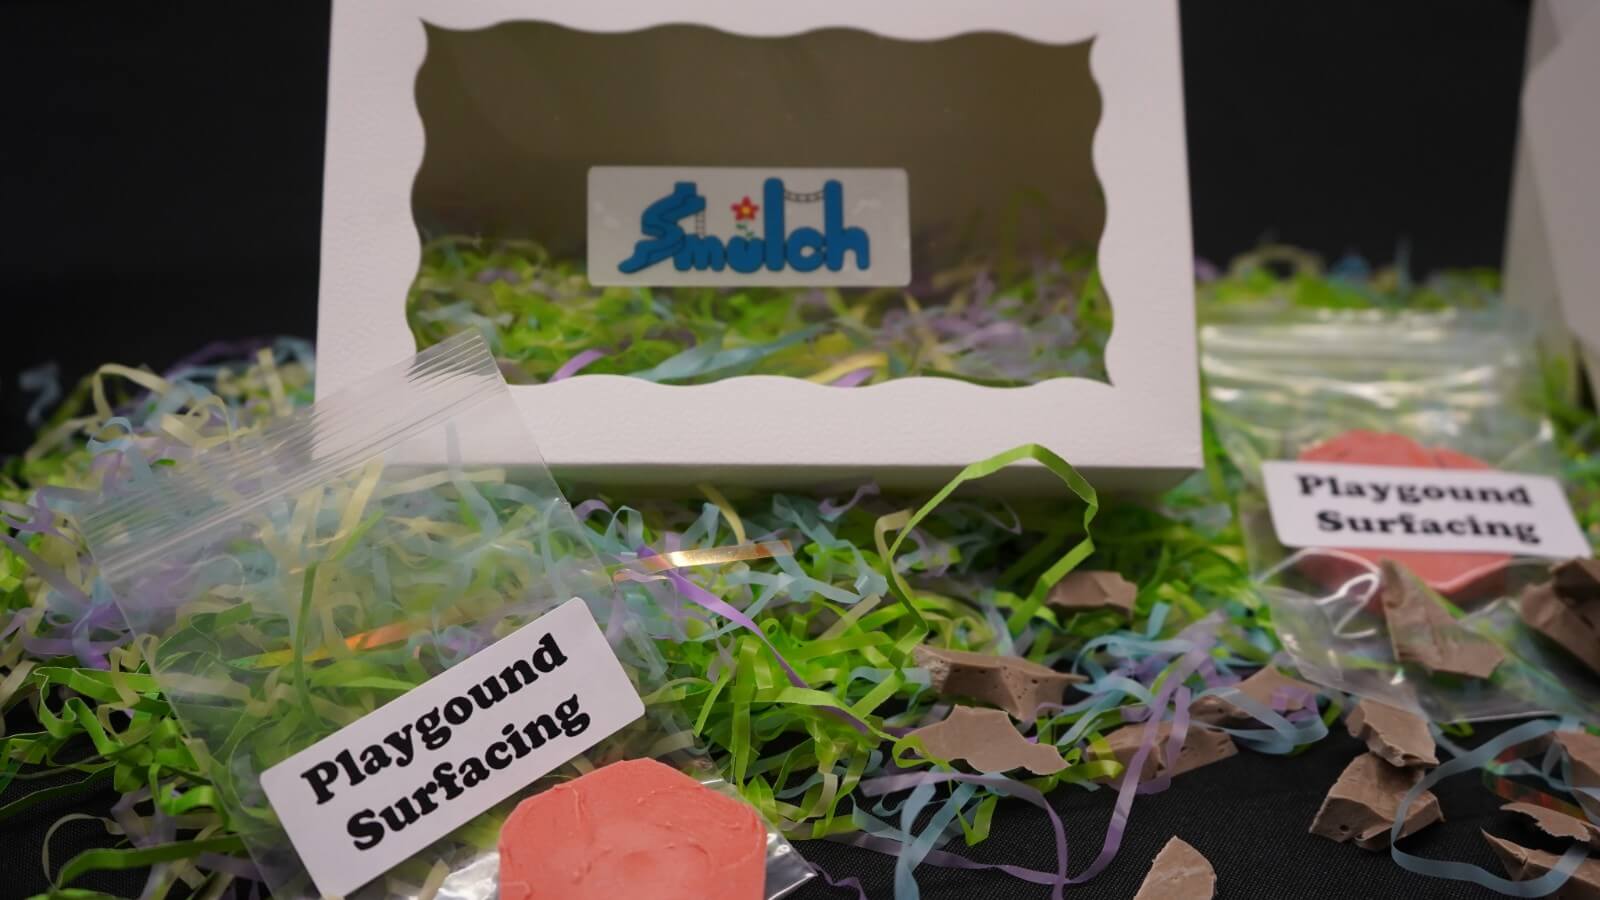 grand-prize-product-Smulch-in-display-box